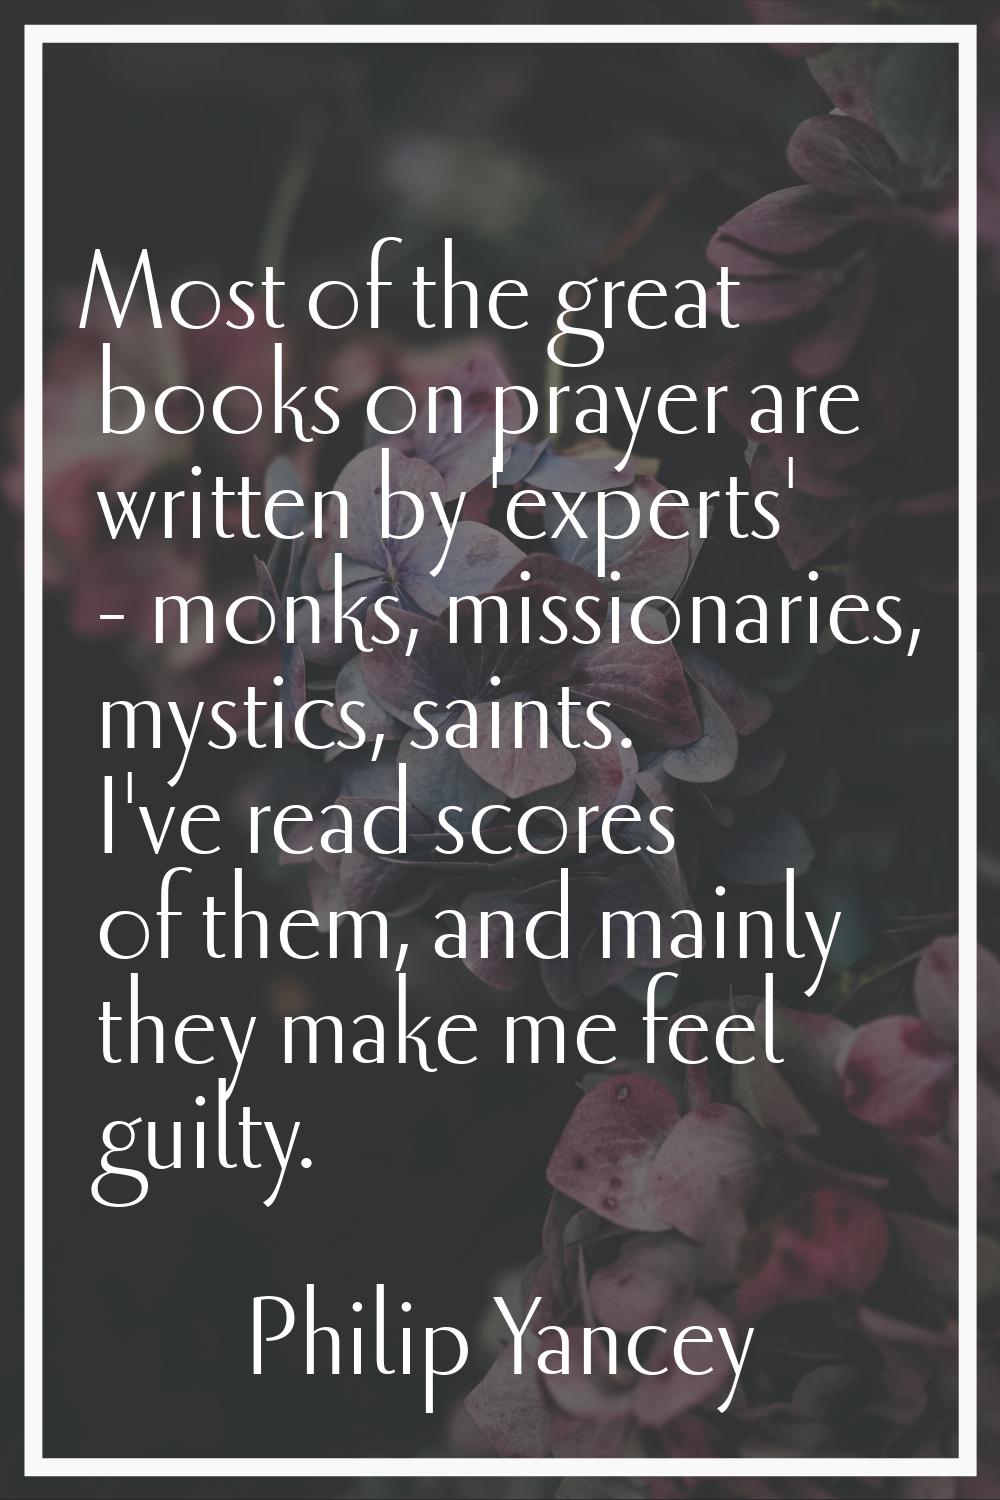 Most of the great books on prayer are written by 'experts' - monks, missionaries, mystics, saints. 